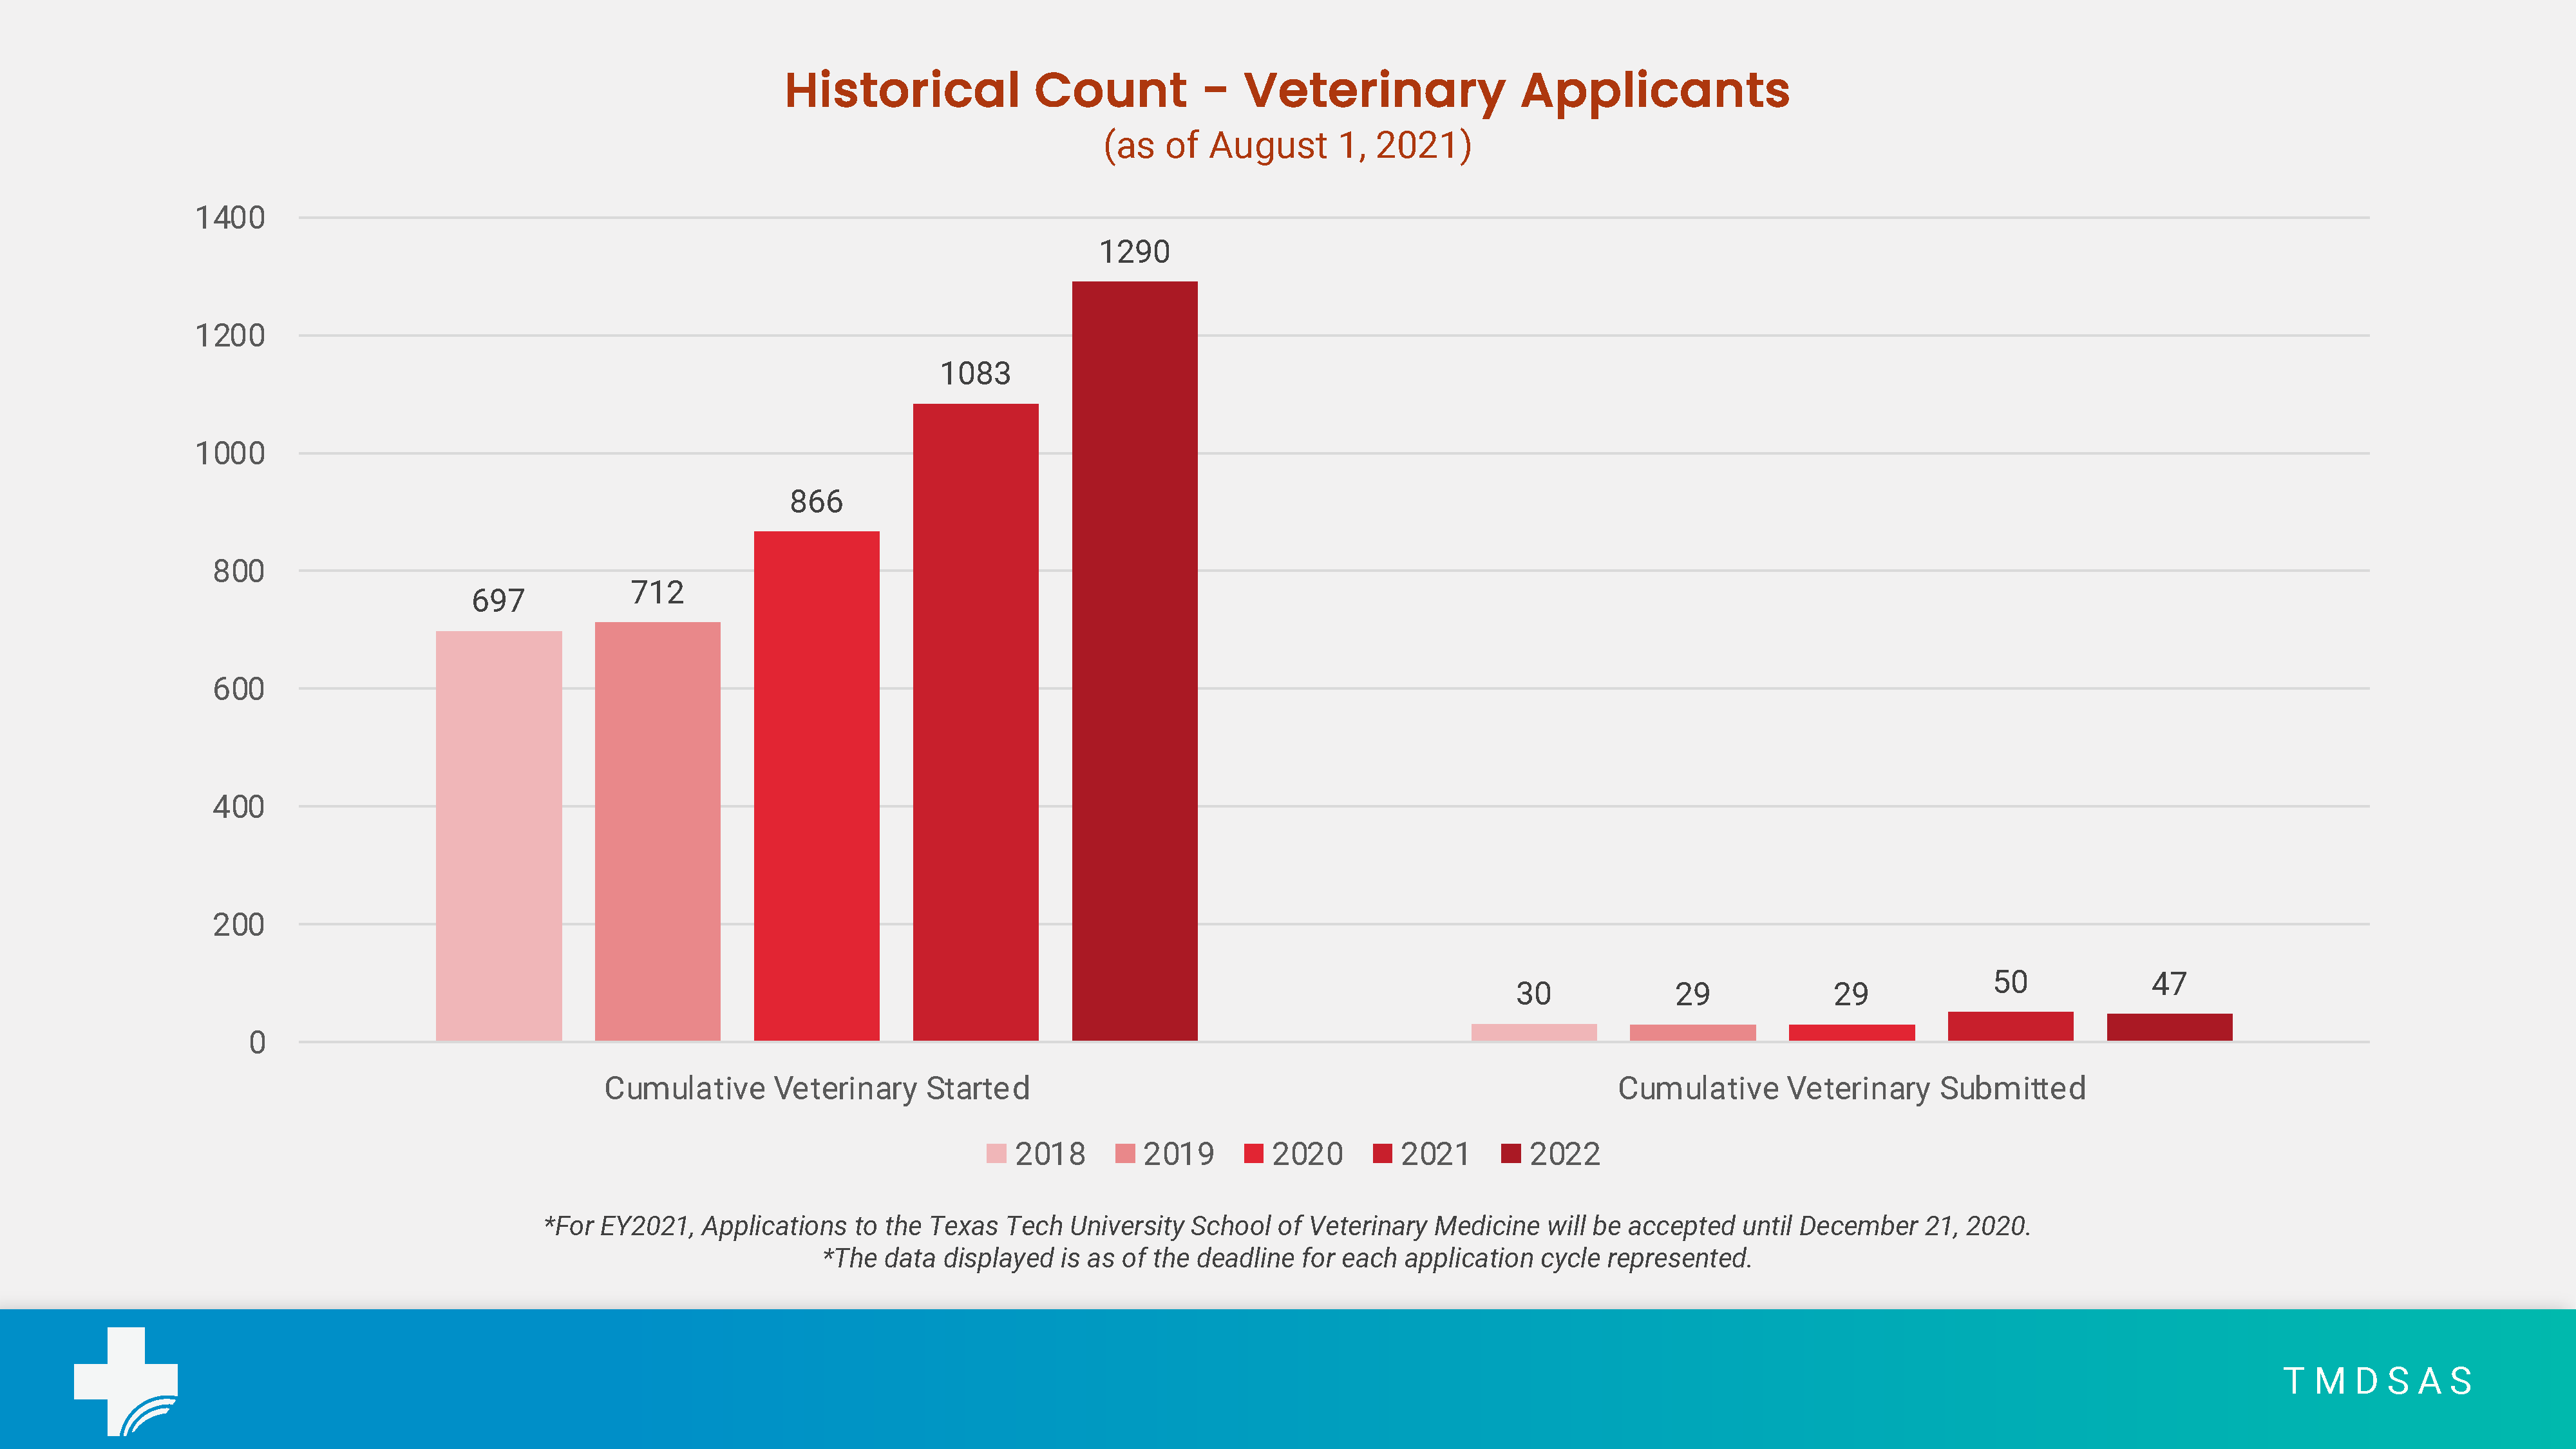 Total Veterinary Application Numbers for August 2021